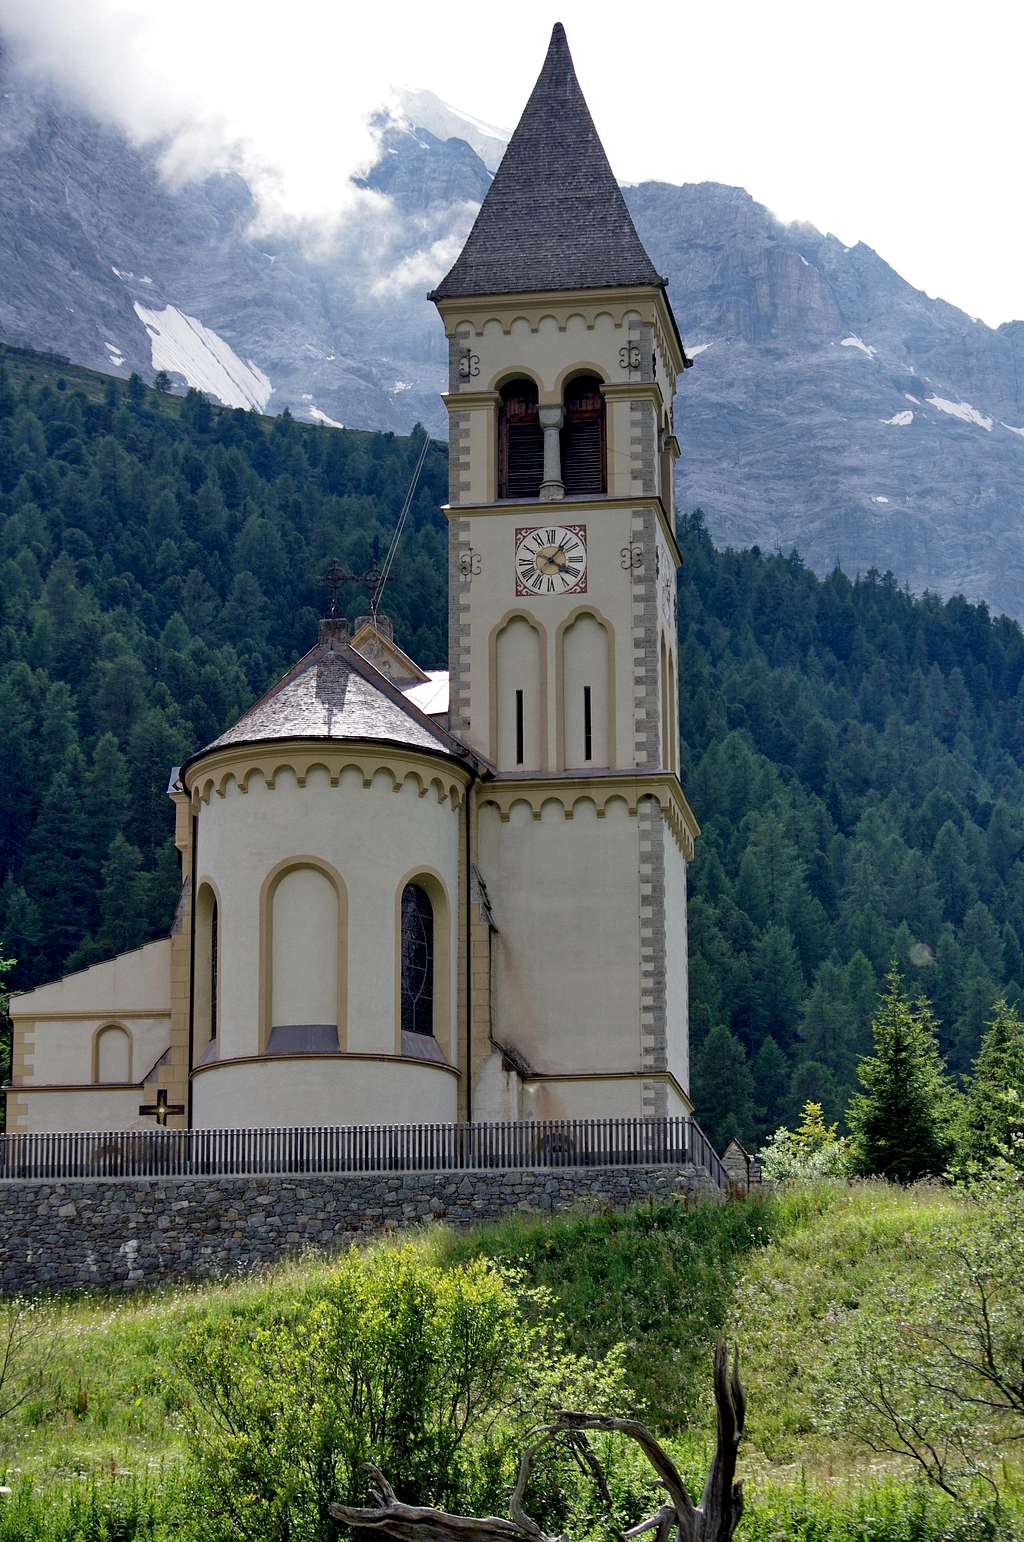 The new church of Solda/Sulden and Ortles/Ortler in background